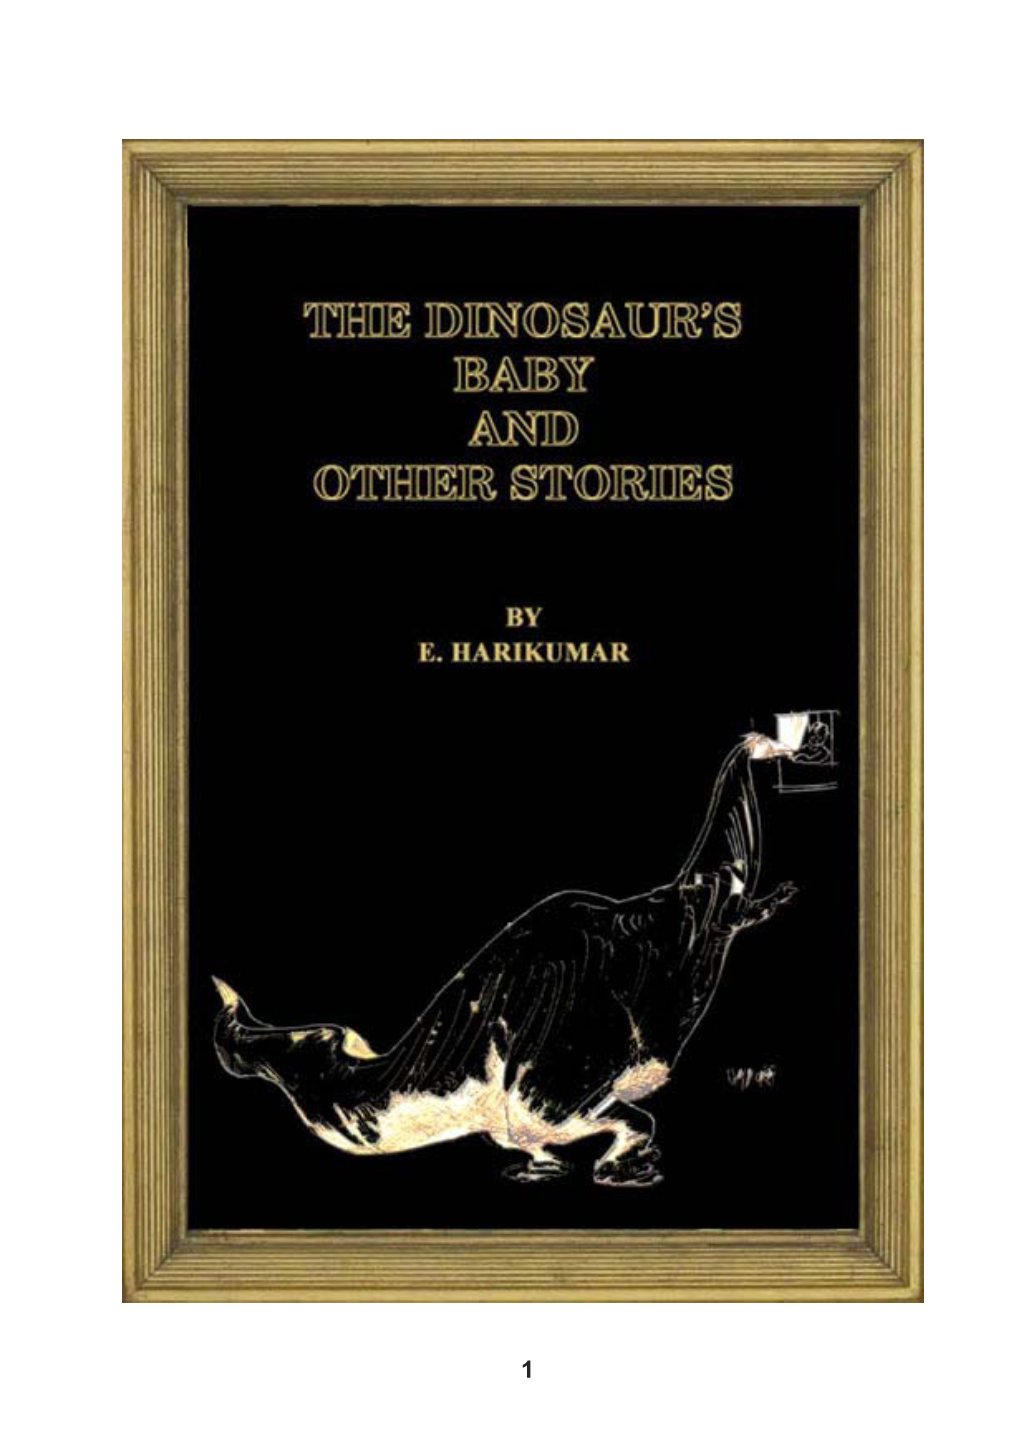 The Dinosaur's Baby and Other Stories